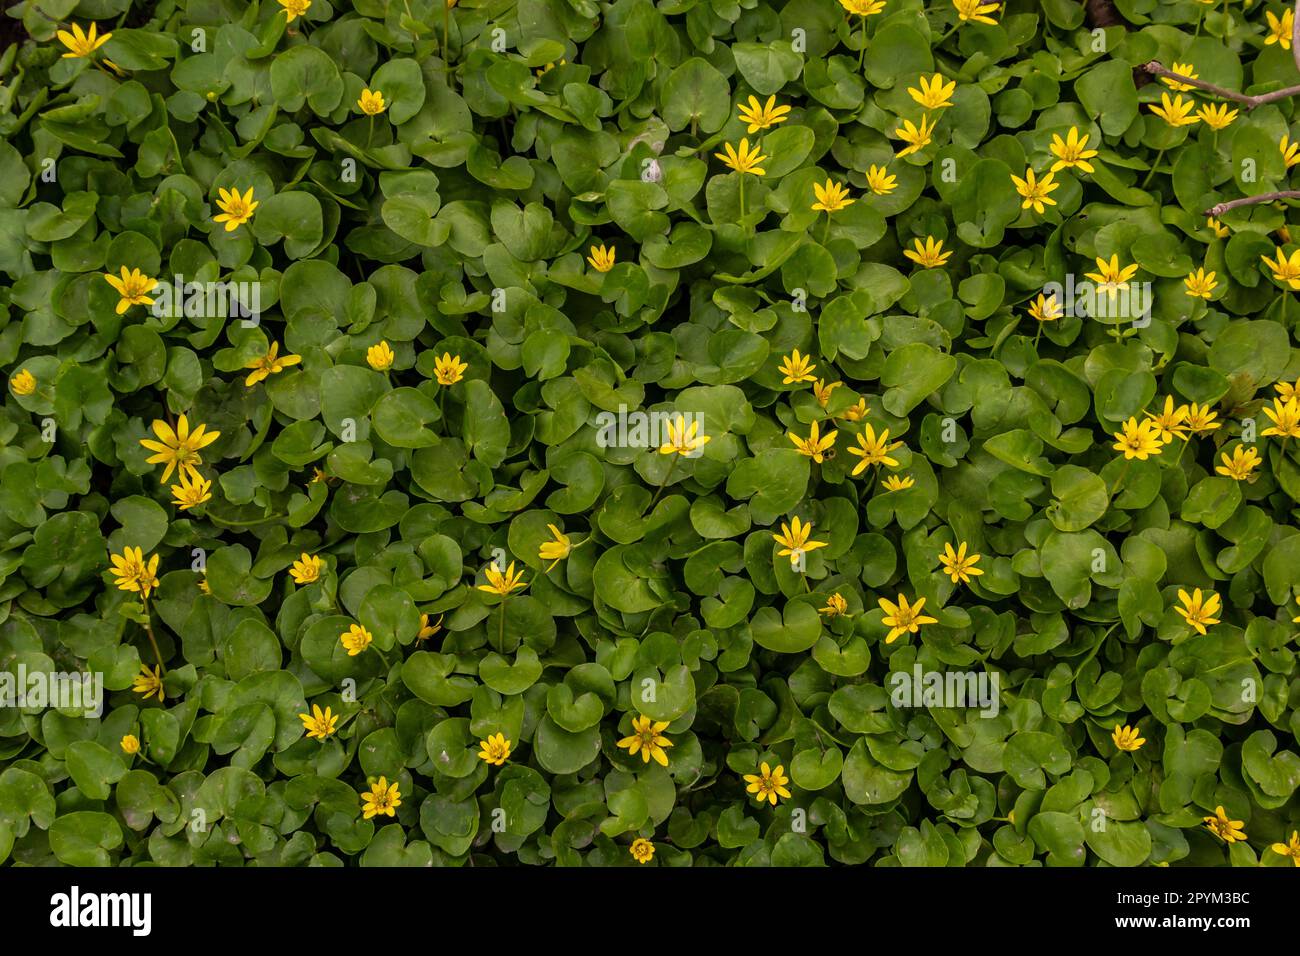 Ficaria verna, lesser celandine, pilewort or ranunculus ficaria yellow spring flowers close up. Spring background of flowers. Stock Photo